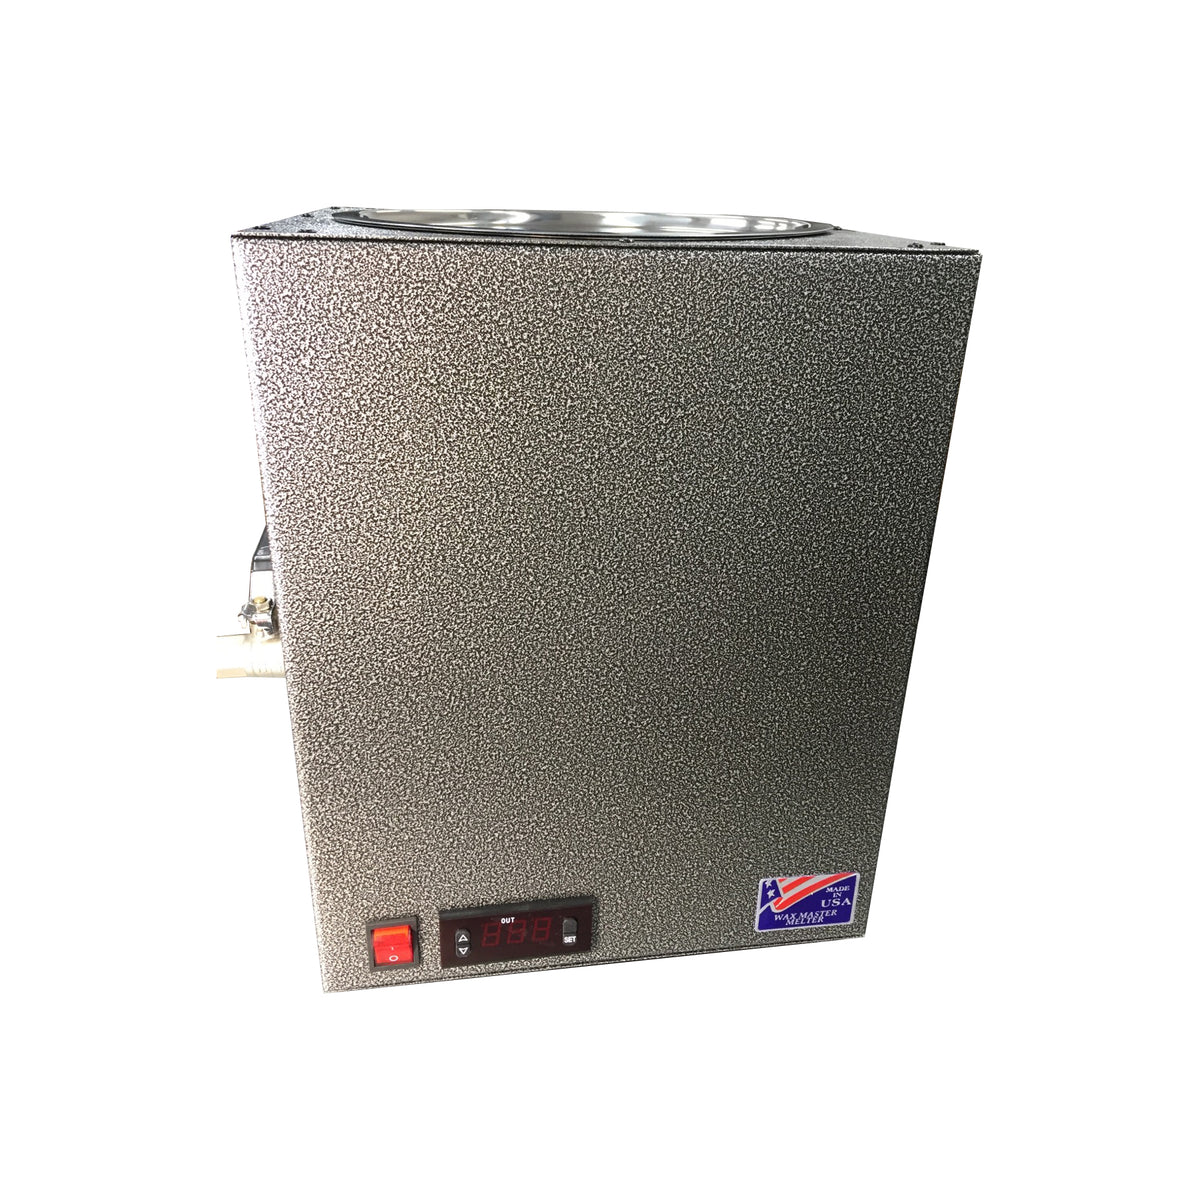 New 220 Volt Power. Wax Melter For Candle Making, This Wax Warmer Will – Soy  Lite Candle Supplies